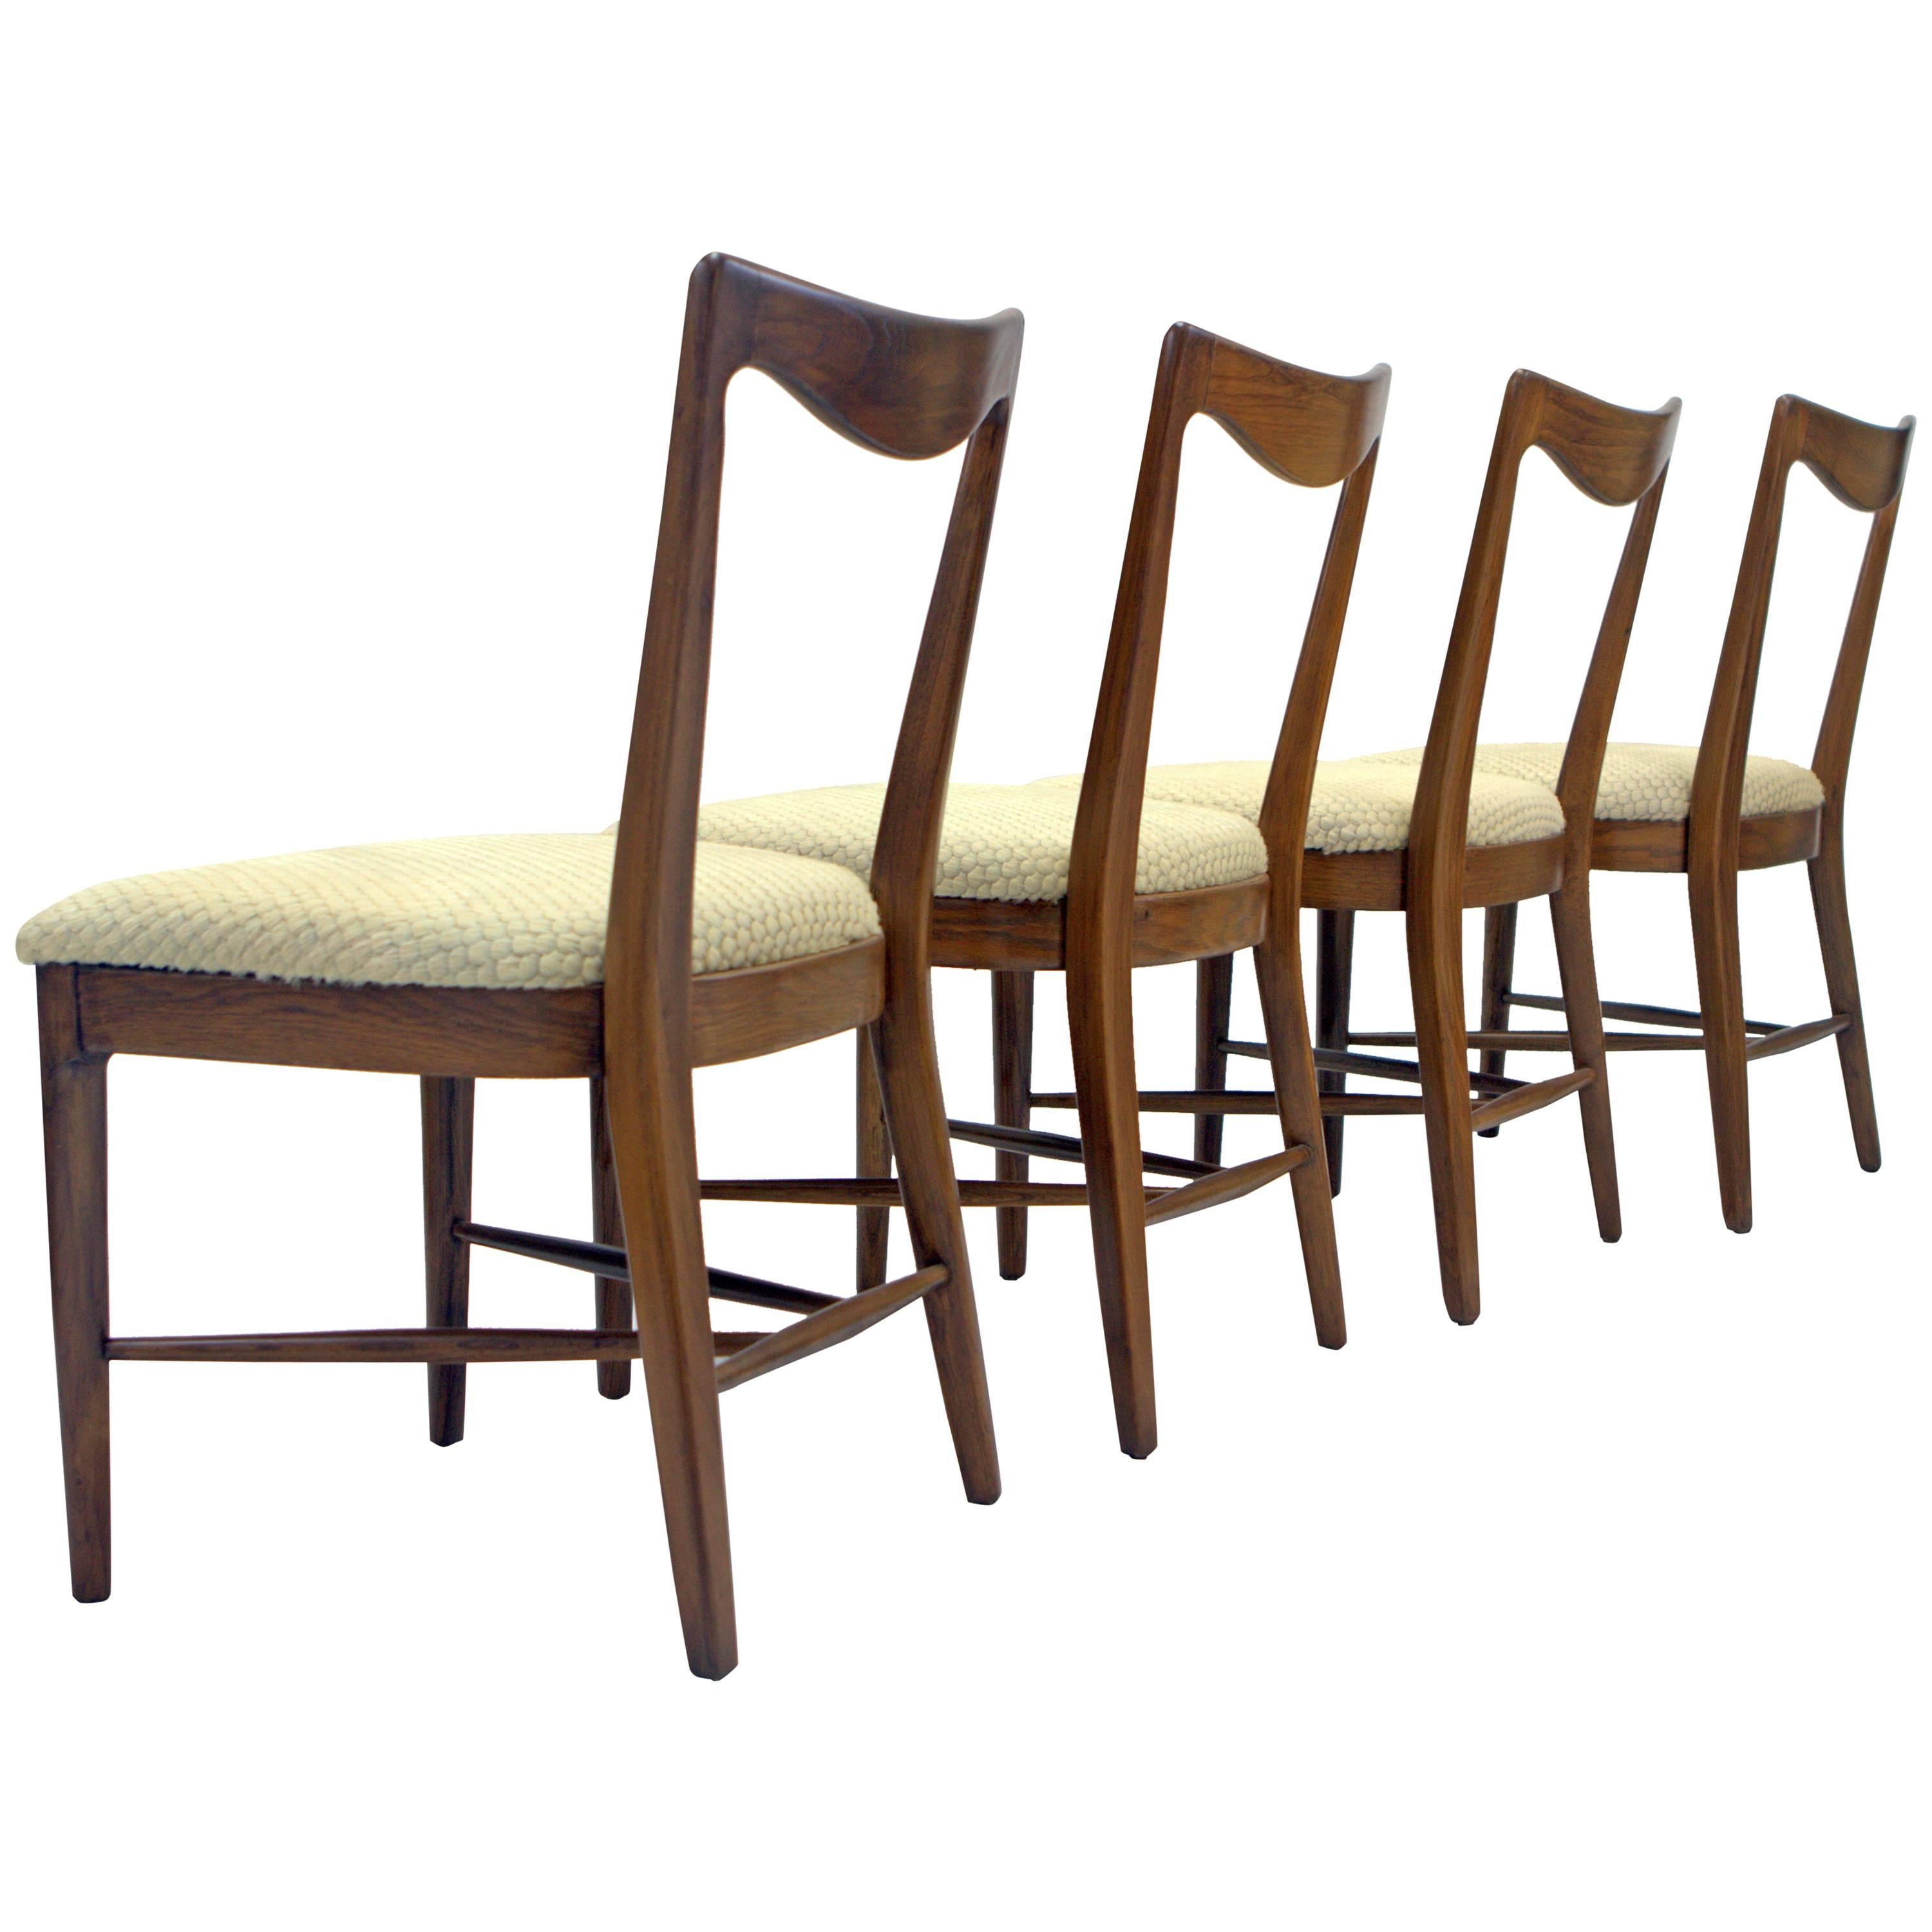 Set of Four Italian Walnut, Scalloped Hide Dining Chairs in Style of Paolo Buffa